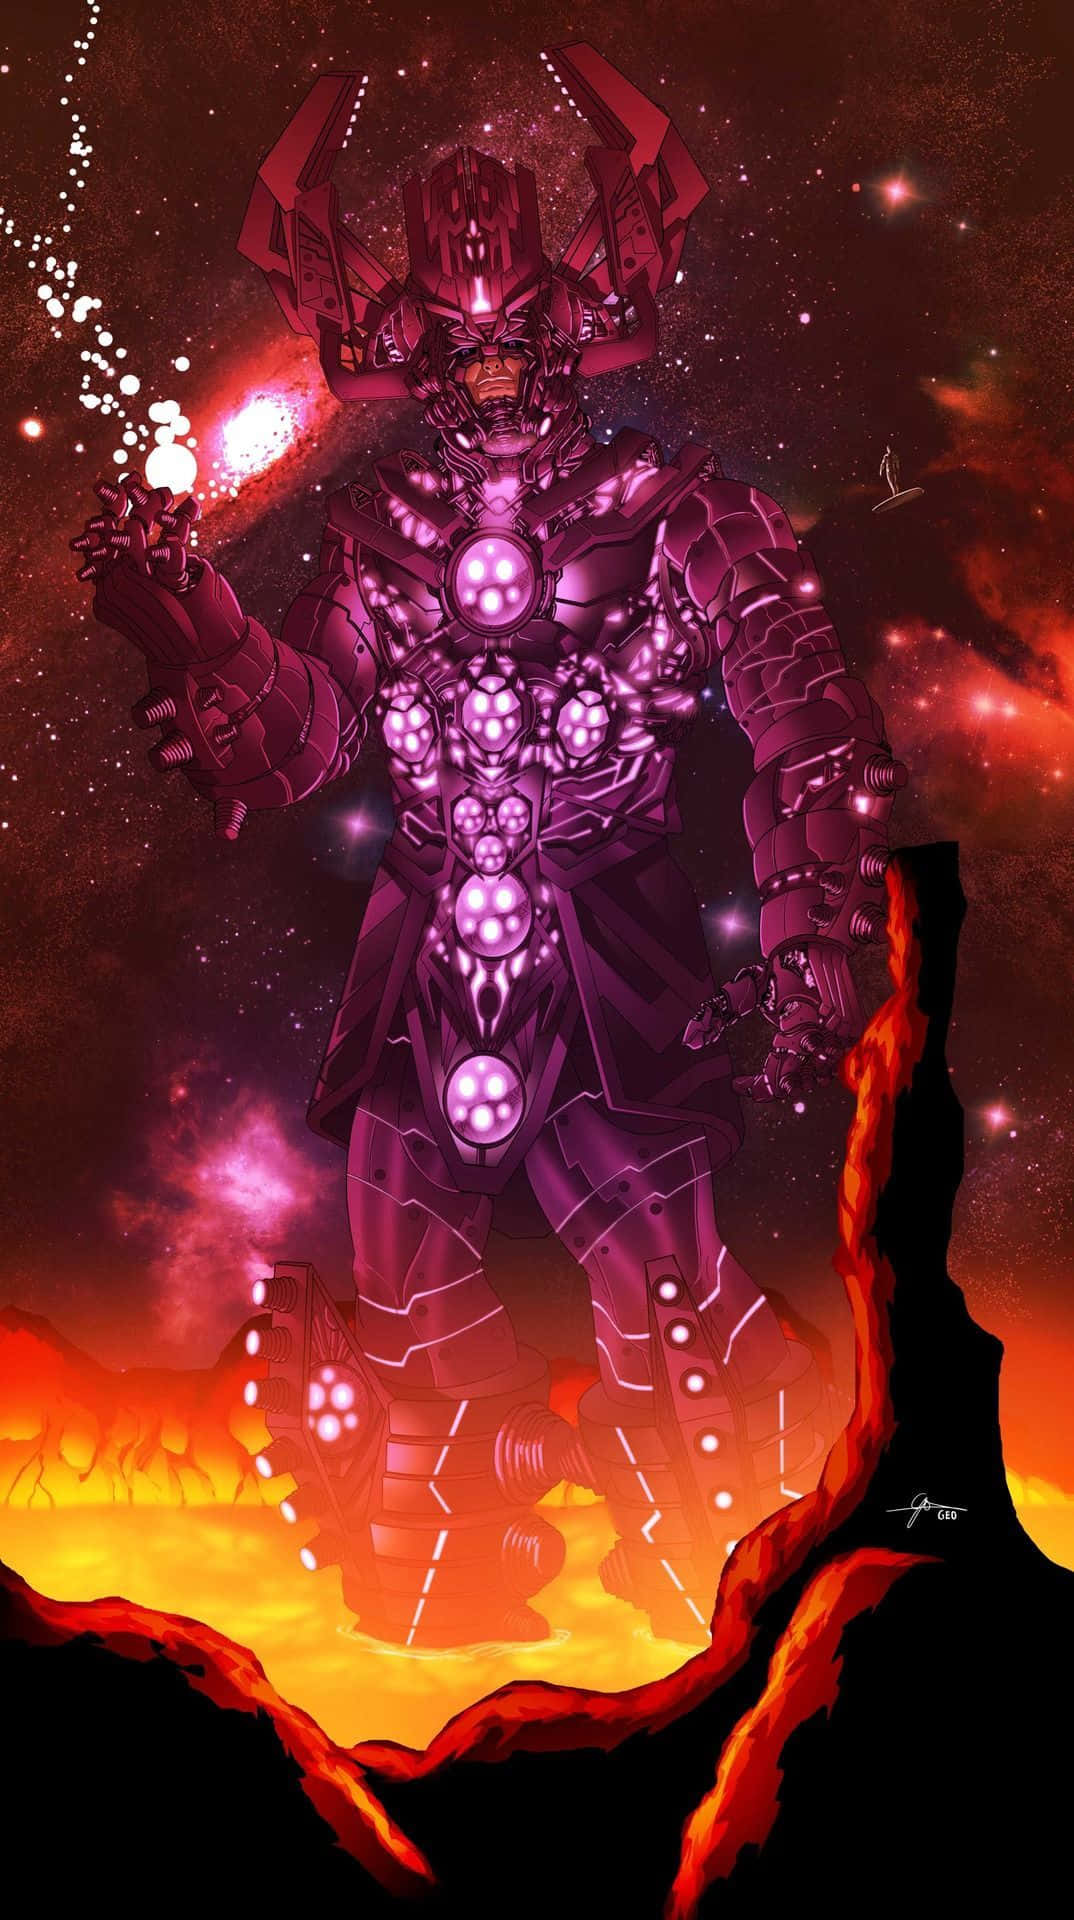 Download wallpapers Galactus 4k violet neon lights Fortnite Battle  Royale Fortnite characters Galactus Skin Fortnite Galactus Fortnite for  desktop free Pictures for desktop free